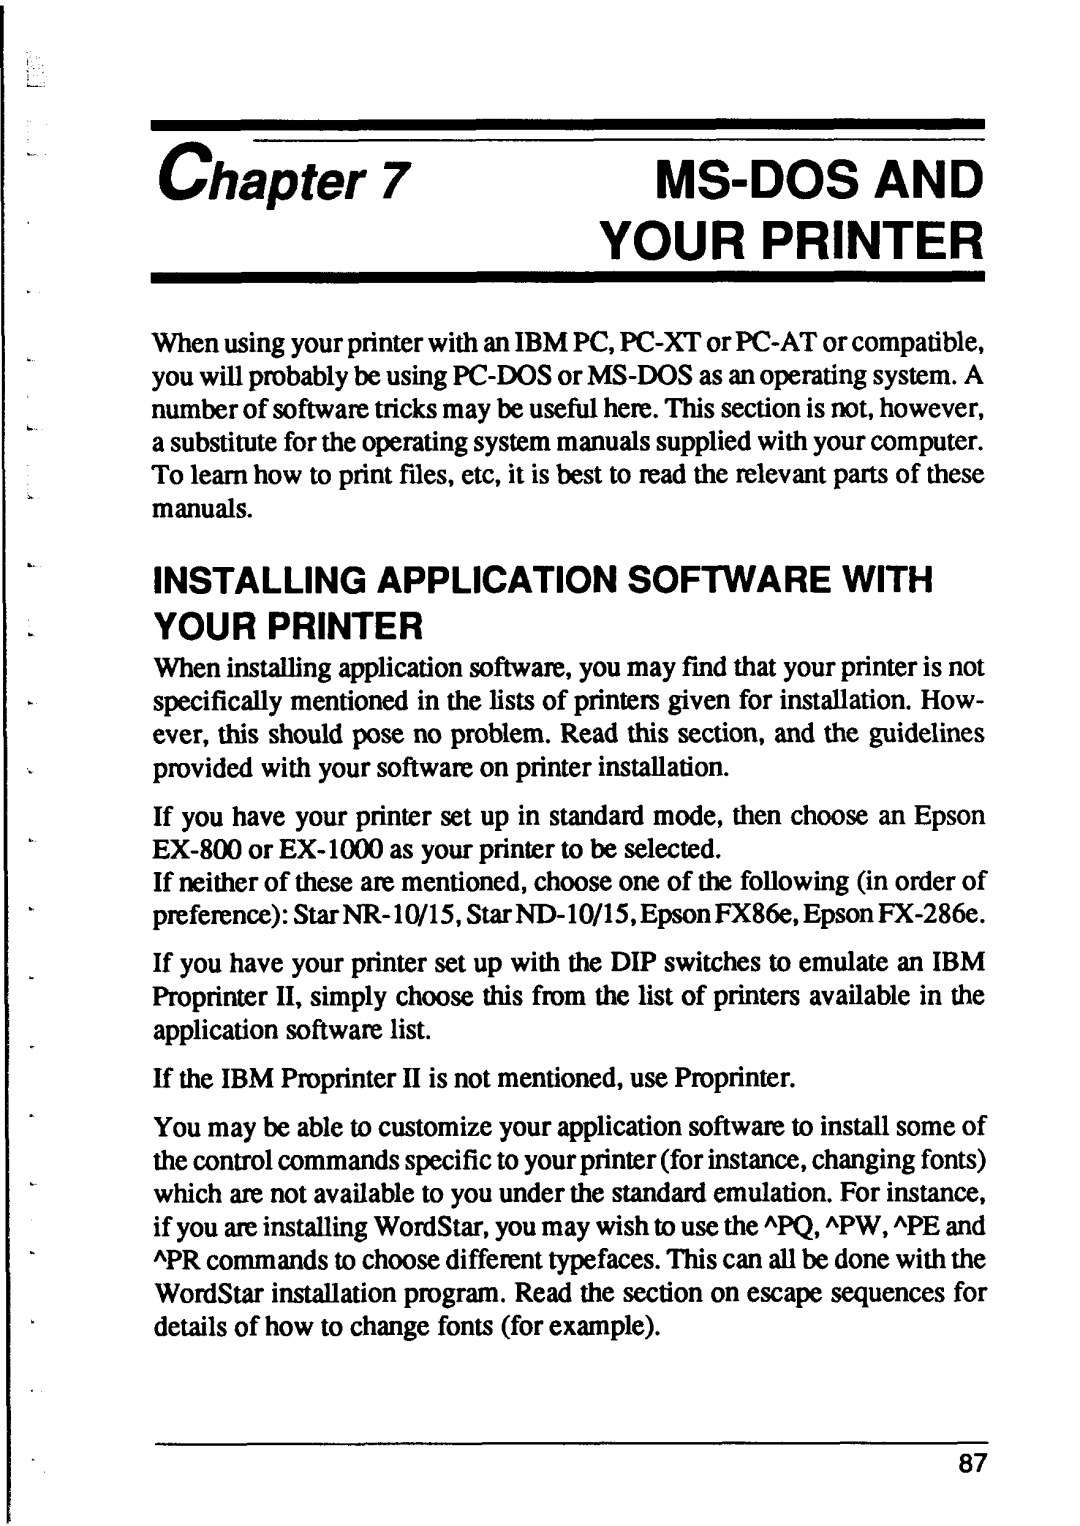 Star Micronics XR-1000, XR-1500 user manual Ms-Dos And, Installing Application Software With Your Printer, Chapter 